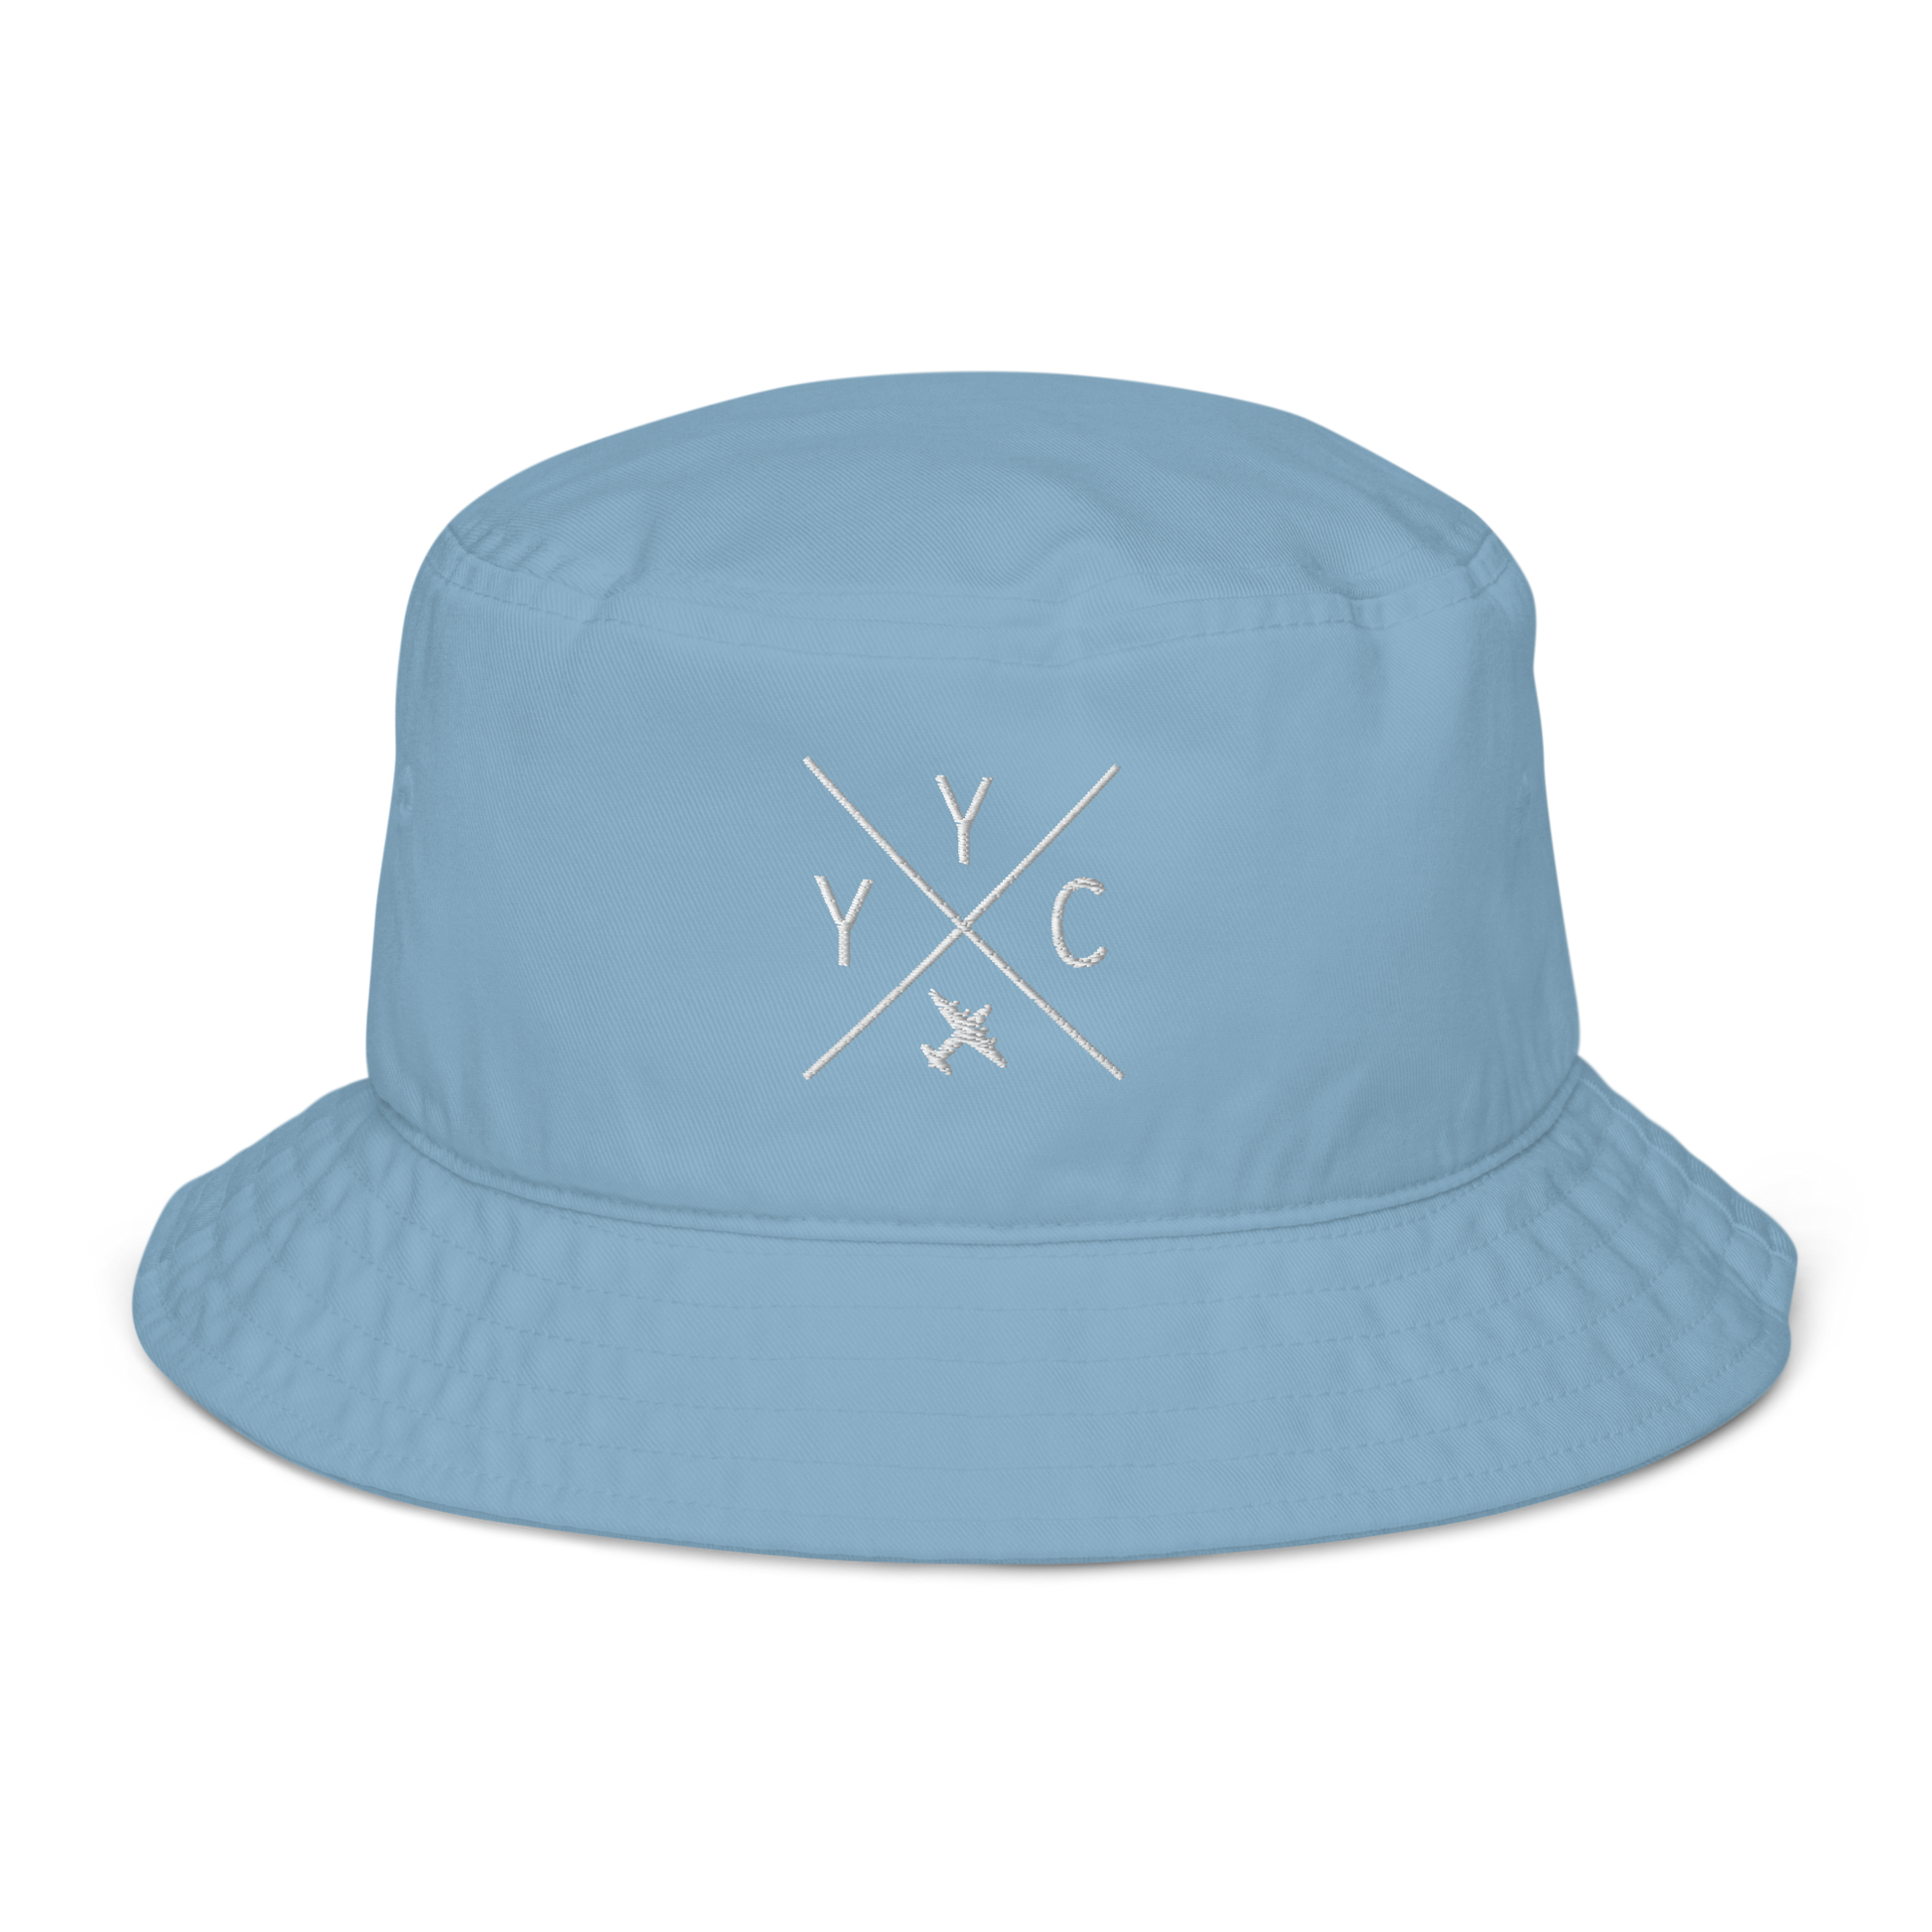 YHM Designs - YYC Calgary Organic Cotton Bucket Hat - Crossed-X Design with Airport Code and Vintage Propliner - White Embroidery - Image 07